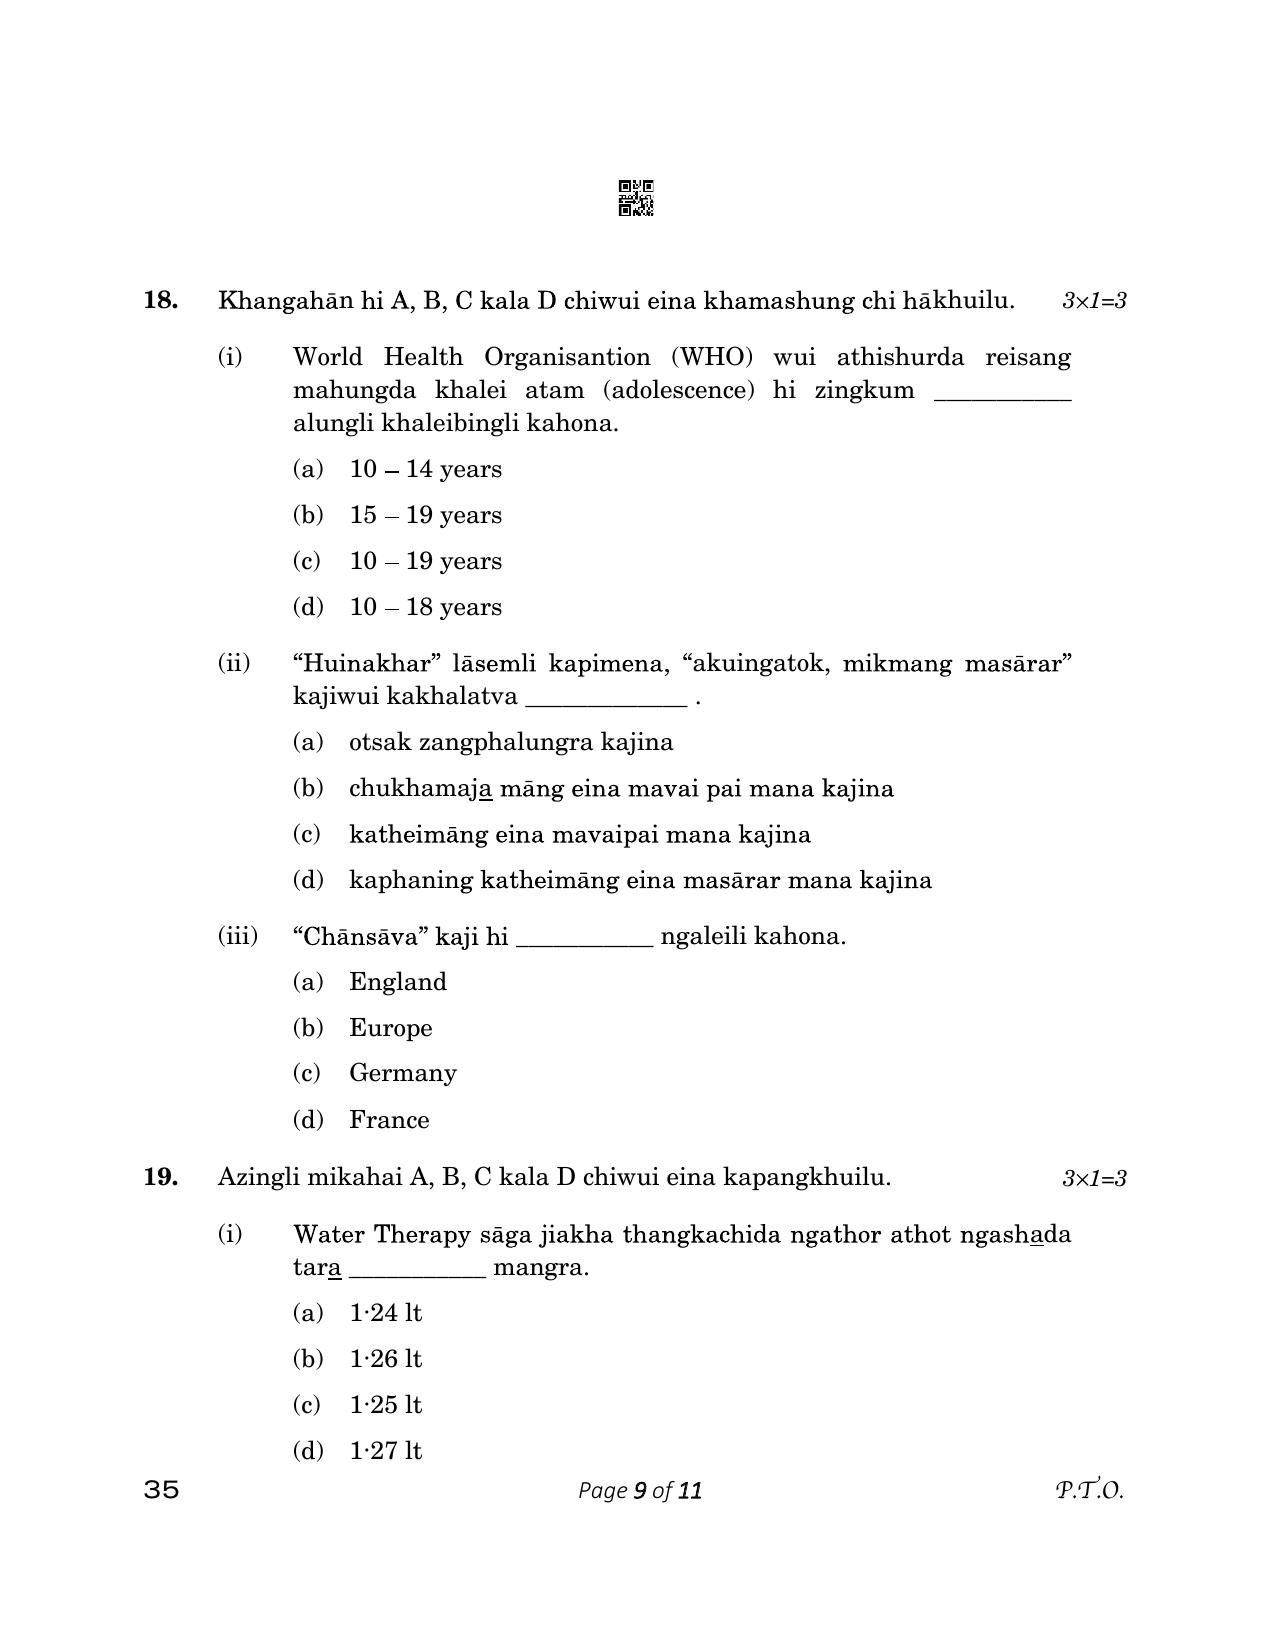 CBSE Class 12 35_Tangkhul 2023 Question Paper - Page 9